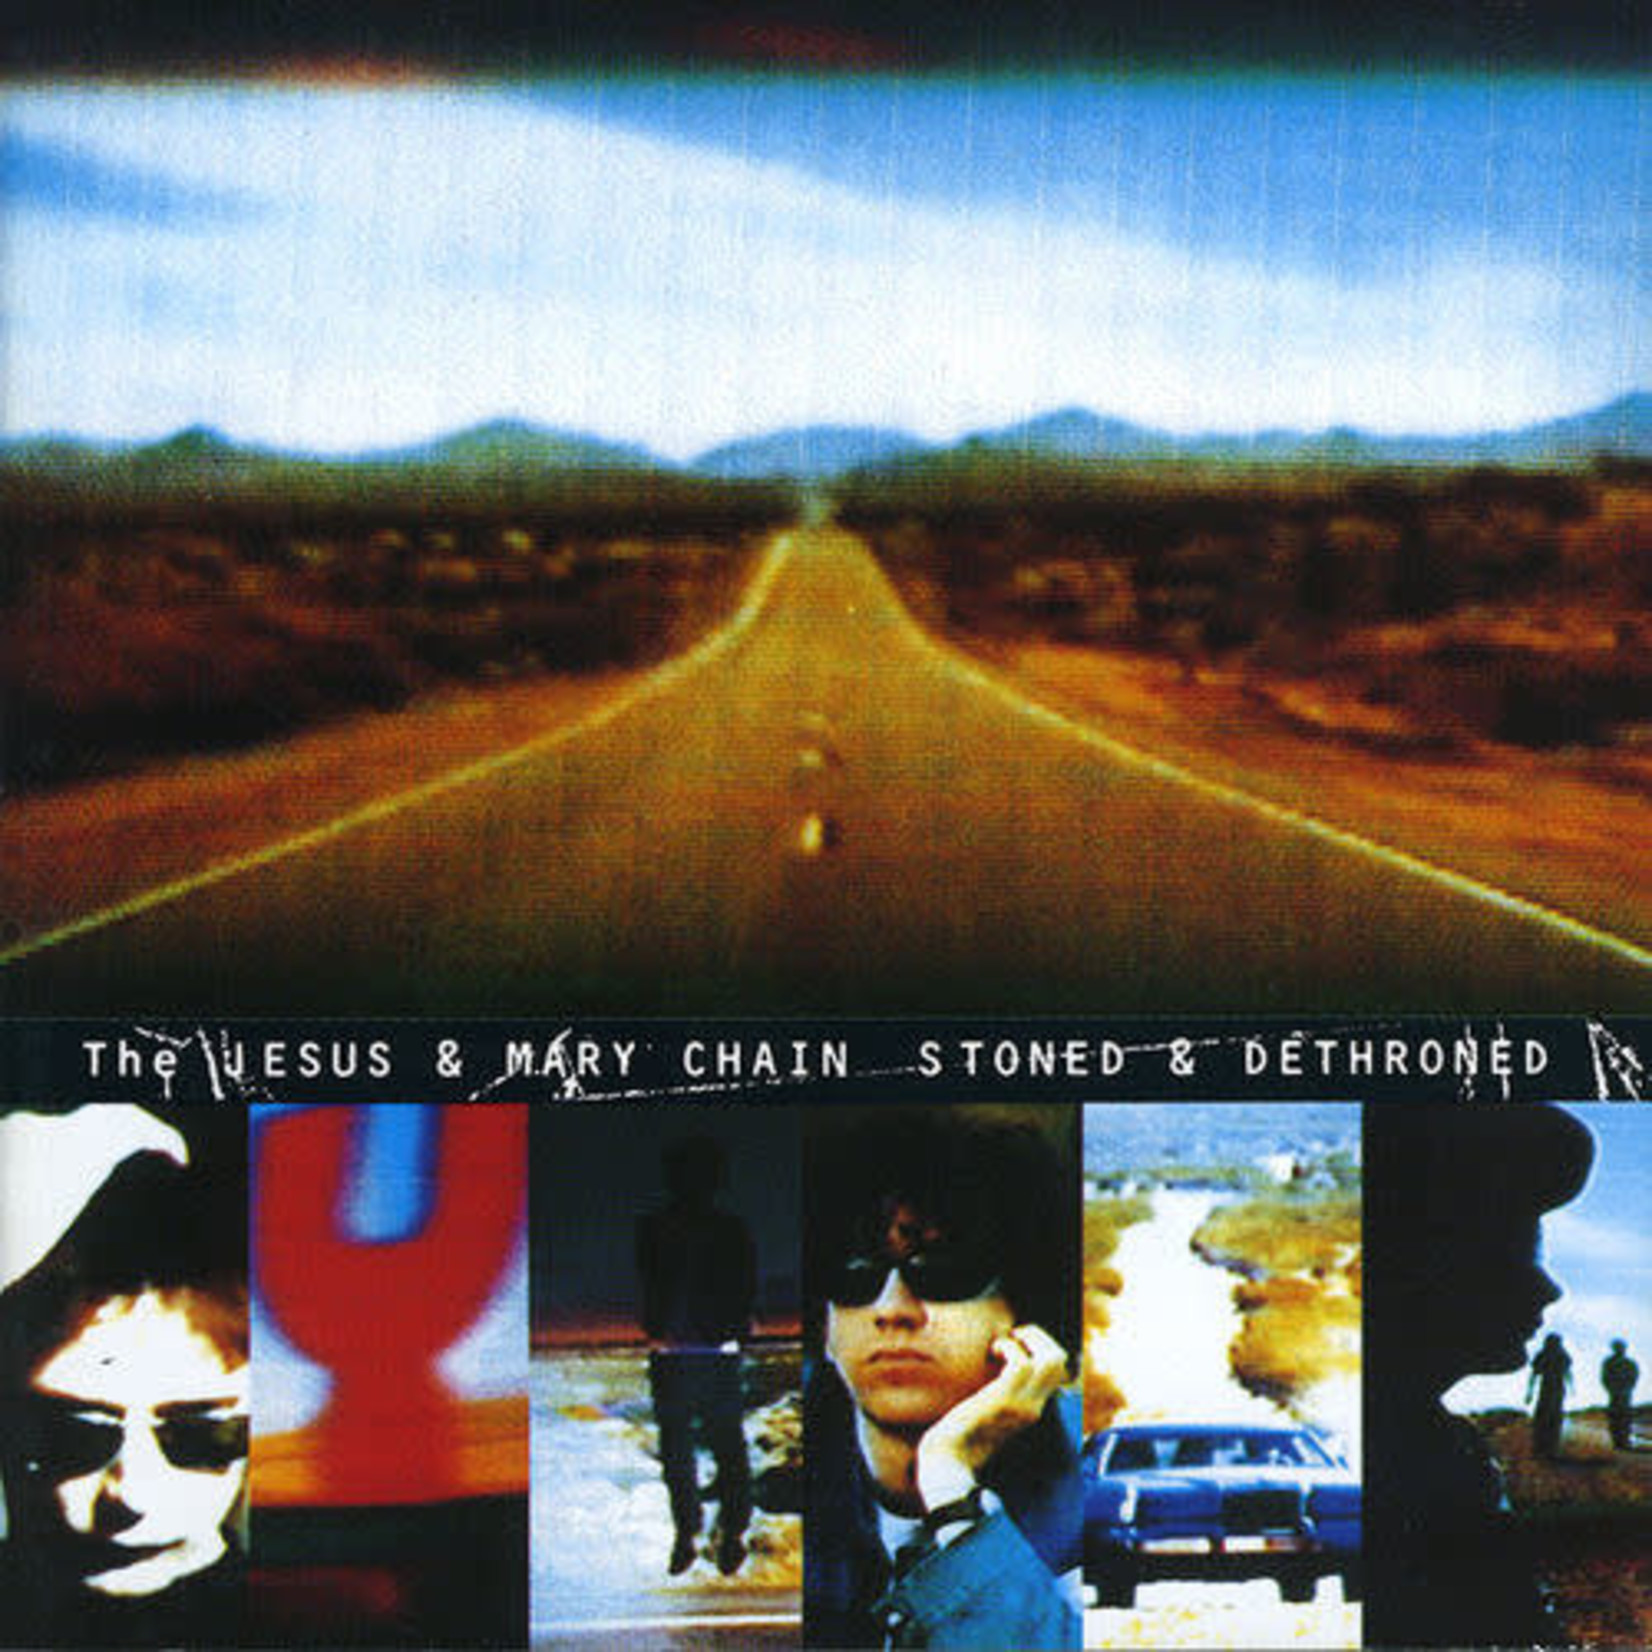 Jesus & Mary Chain - Stoned & Dethroned